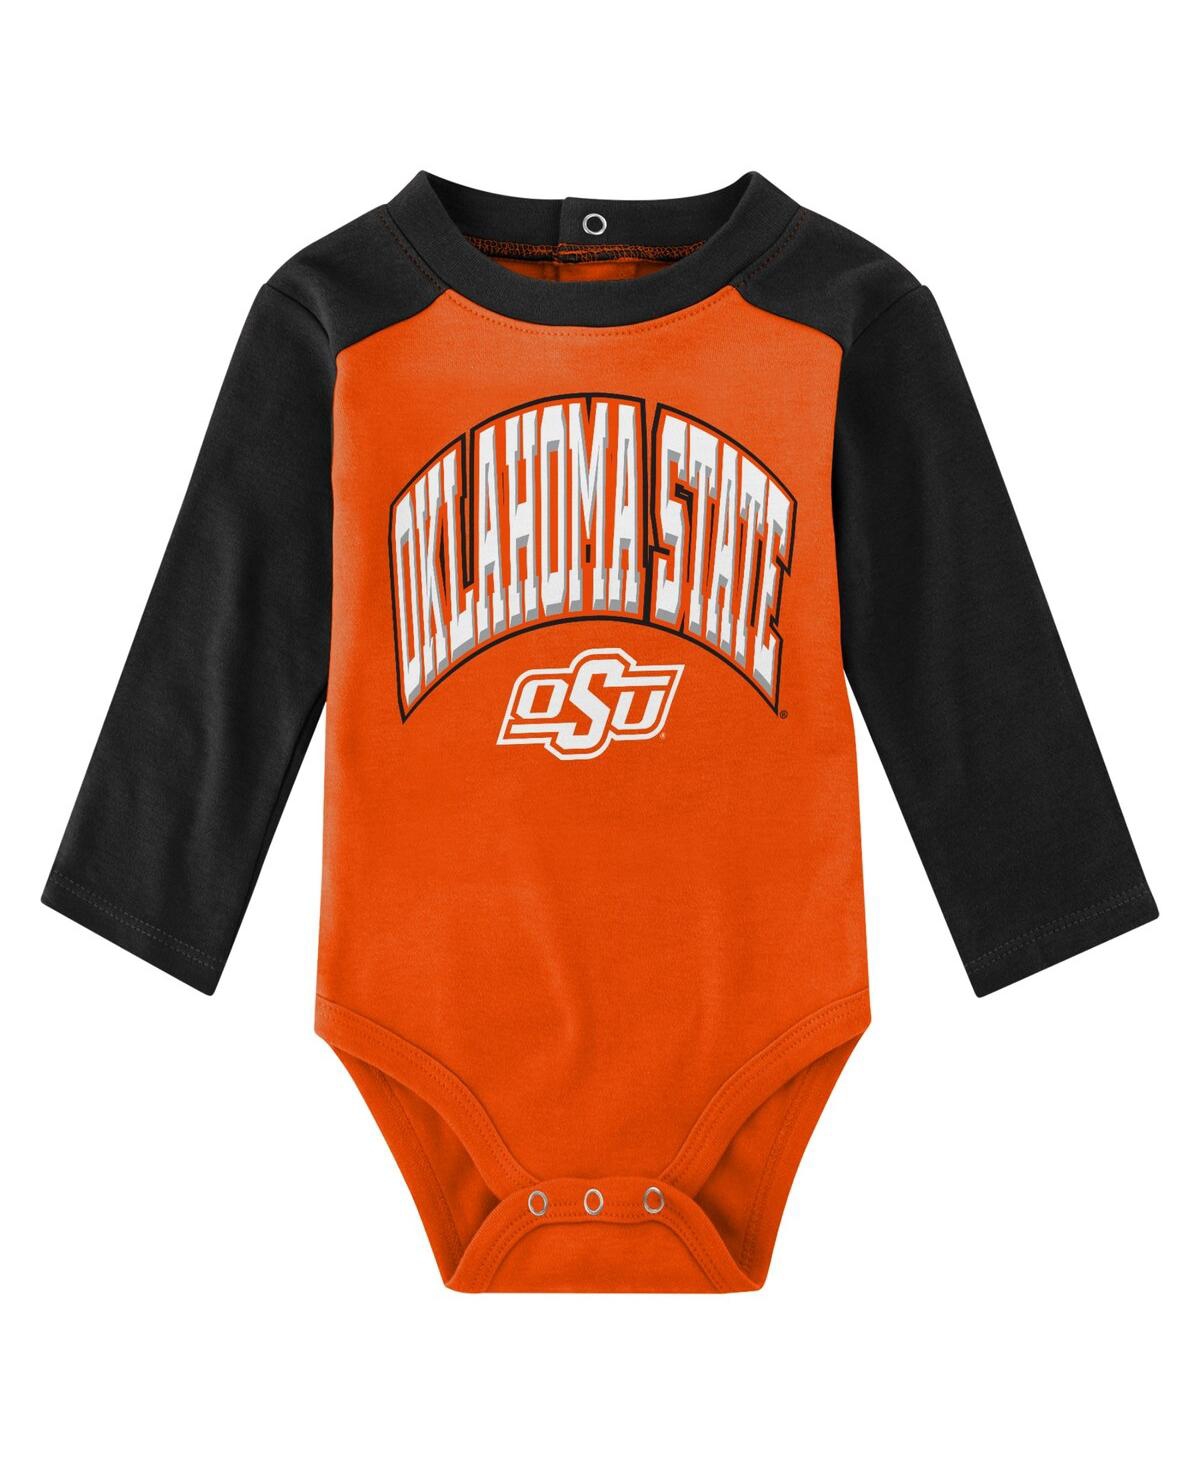 Shop Outerstuff Infant Boys And Girls Orange Oklahoma State Cowboys Rookie Of The Year Long Sleeve Bodysuit And Pant